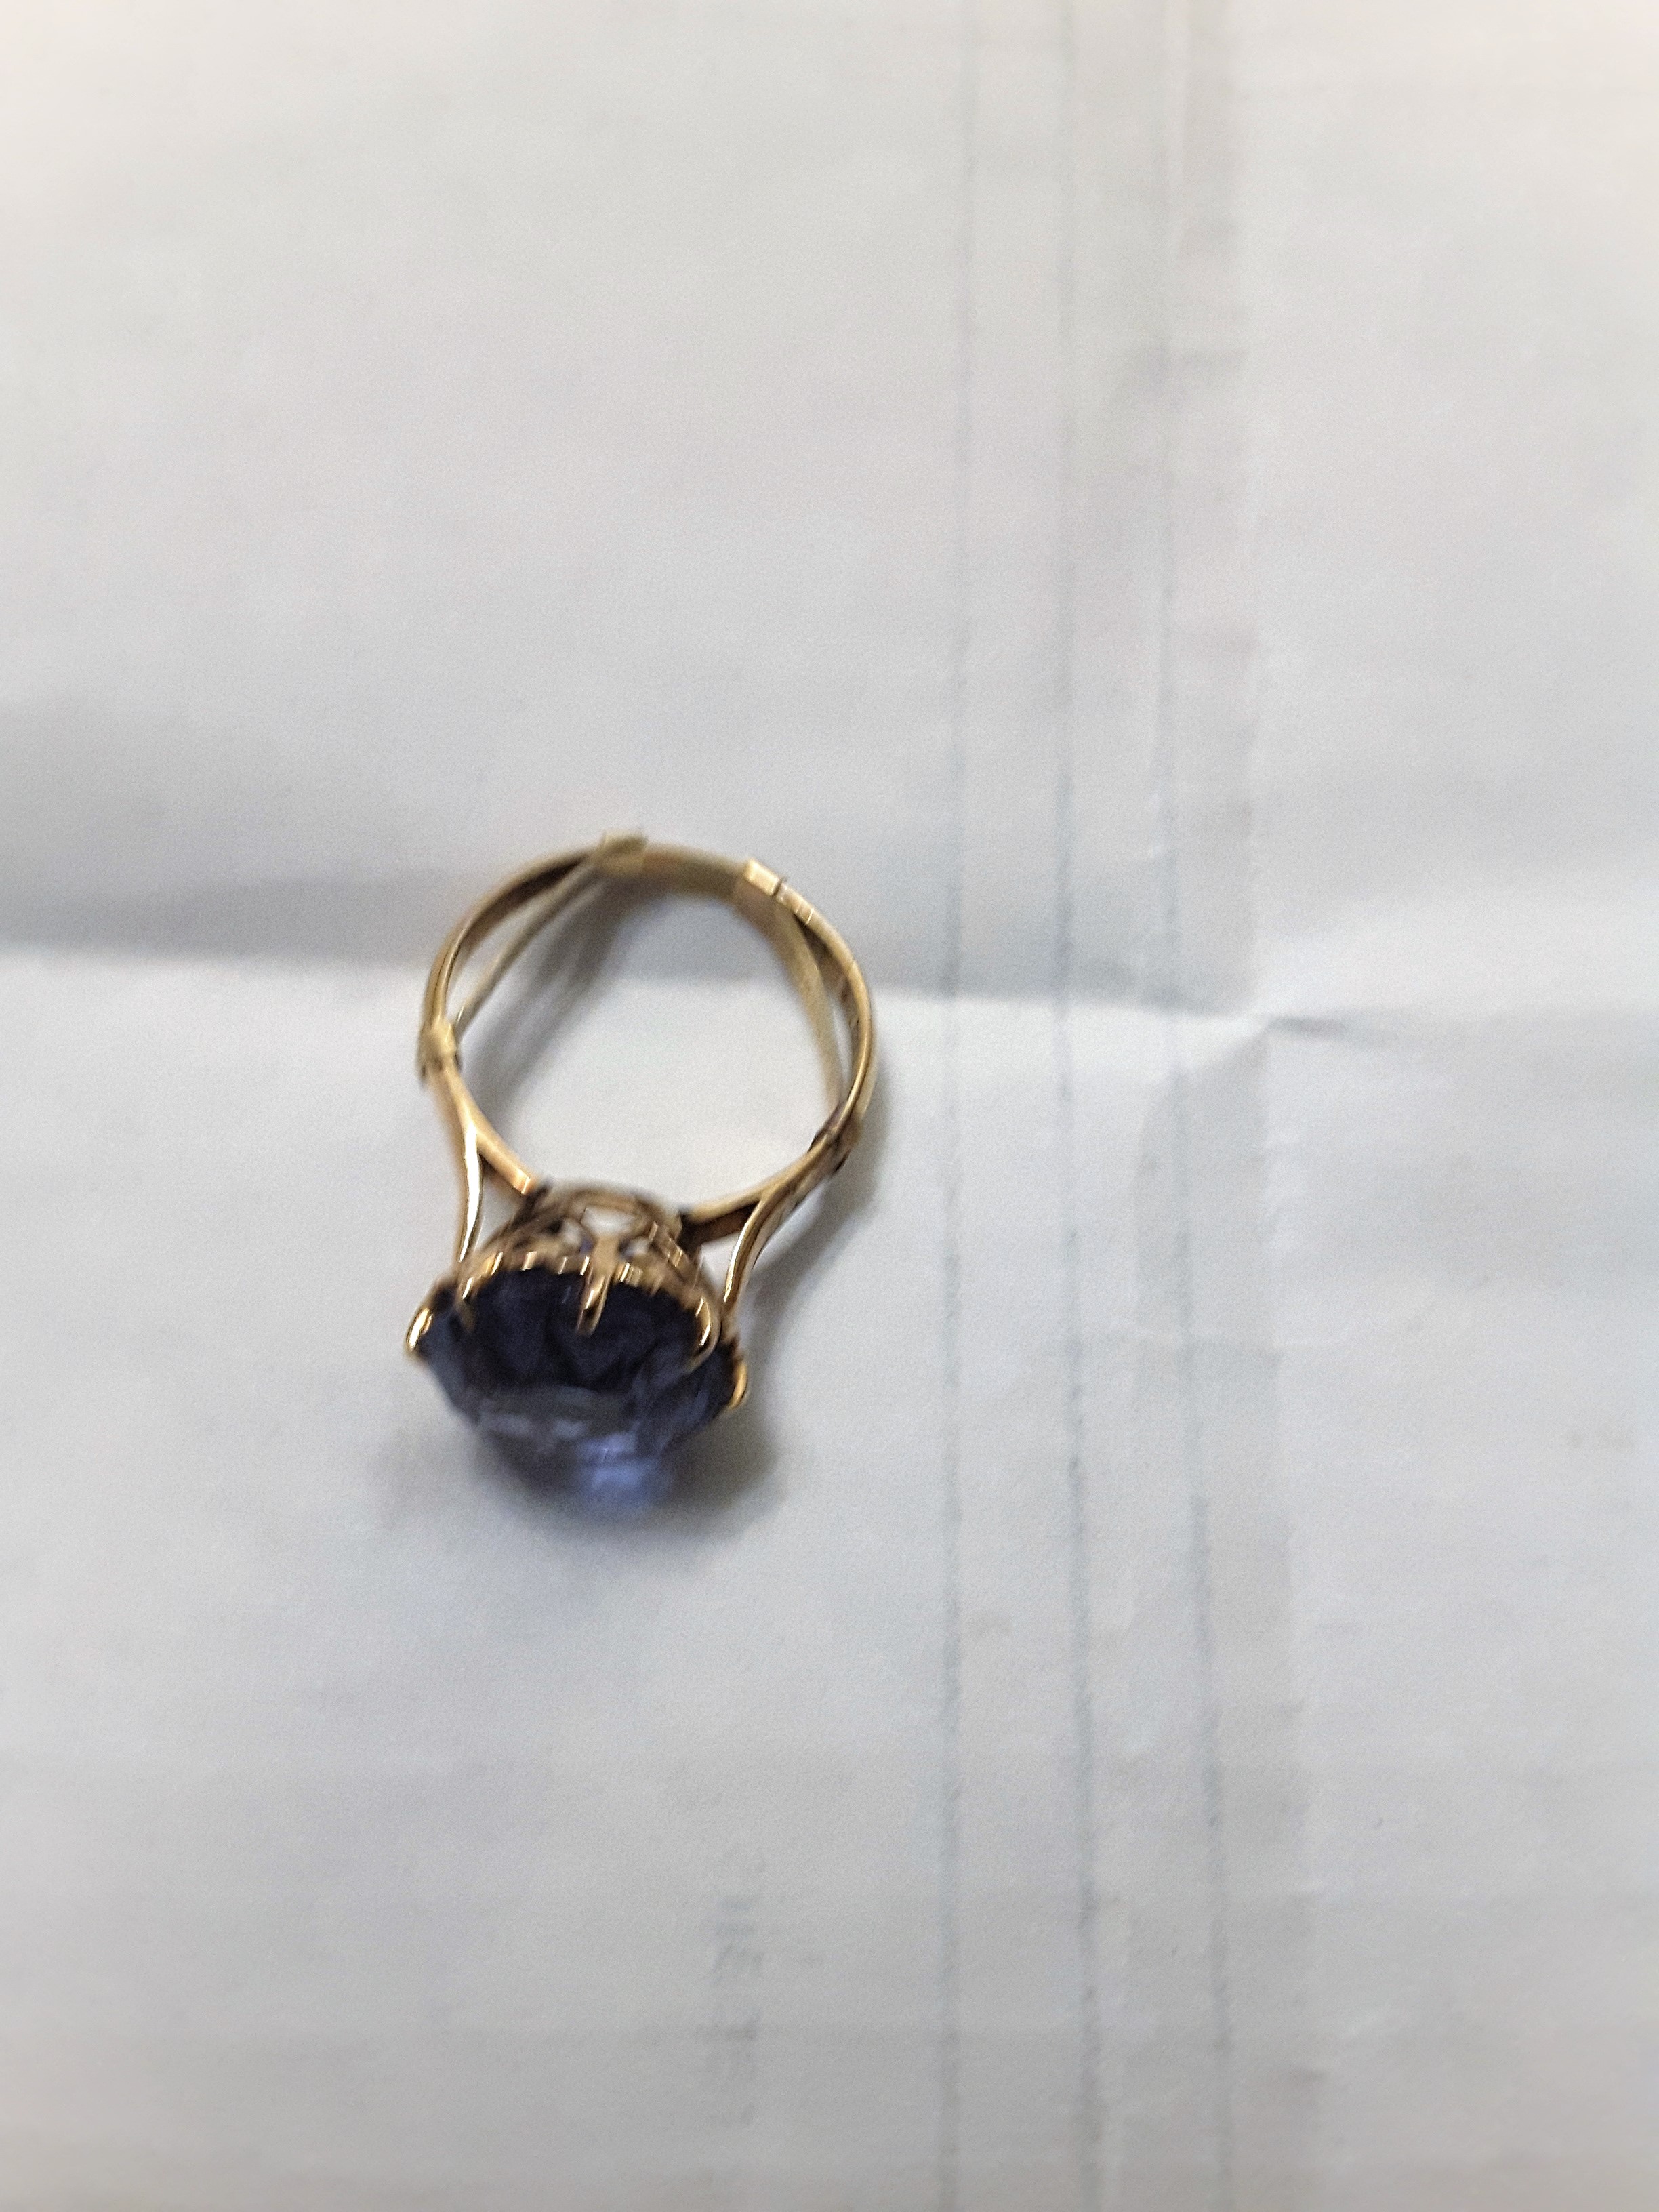 9Ct Gold Round Blue Topaz Ring - Image 3 of 5